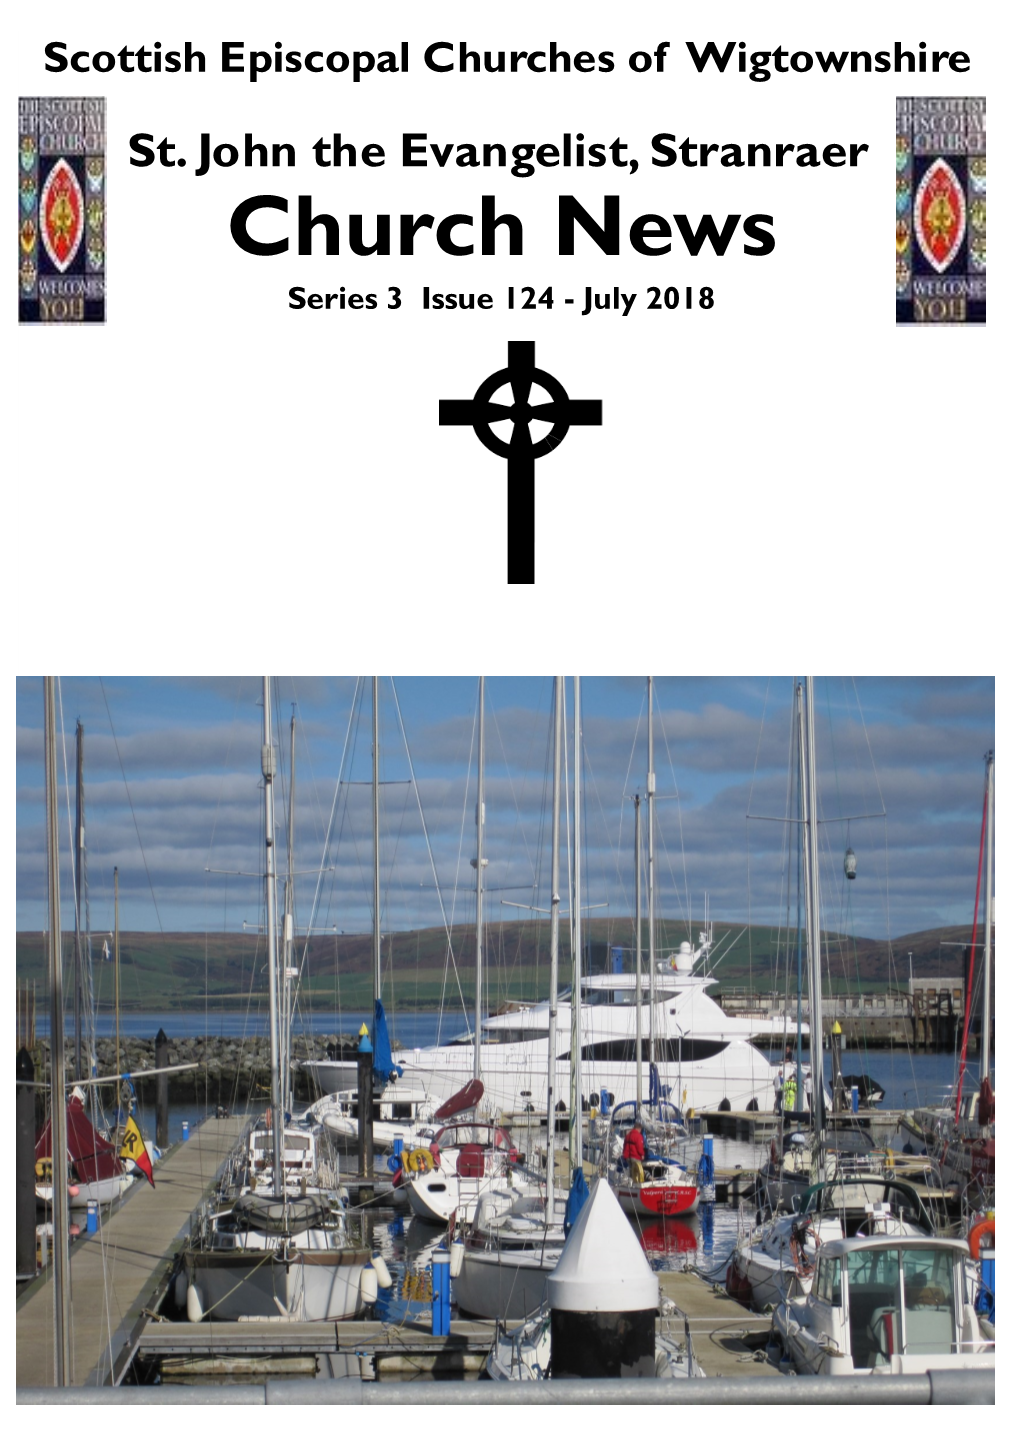 Church News Series 3 Issue 124 - July 2018